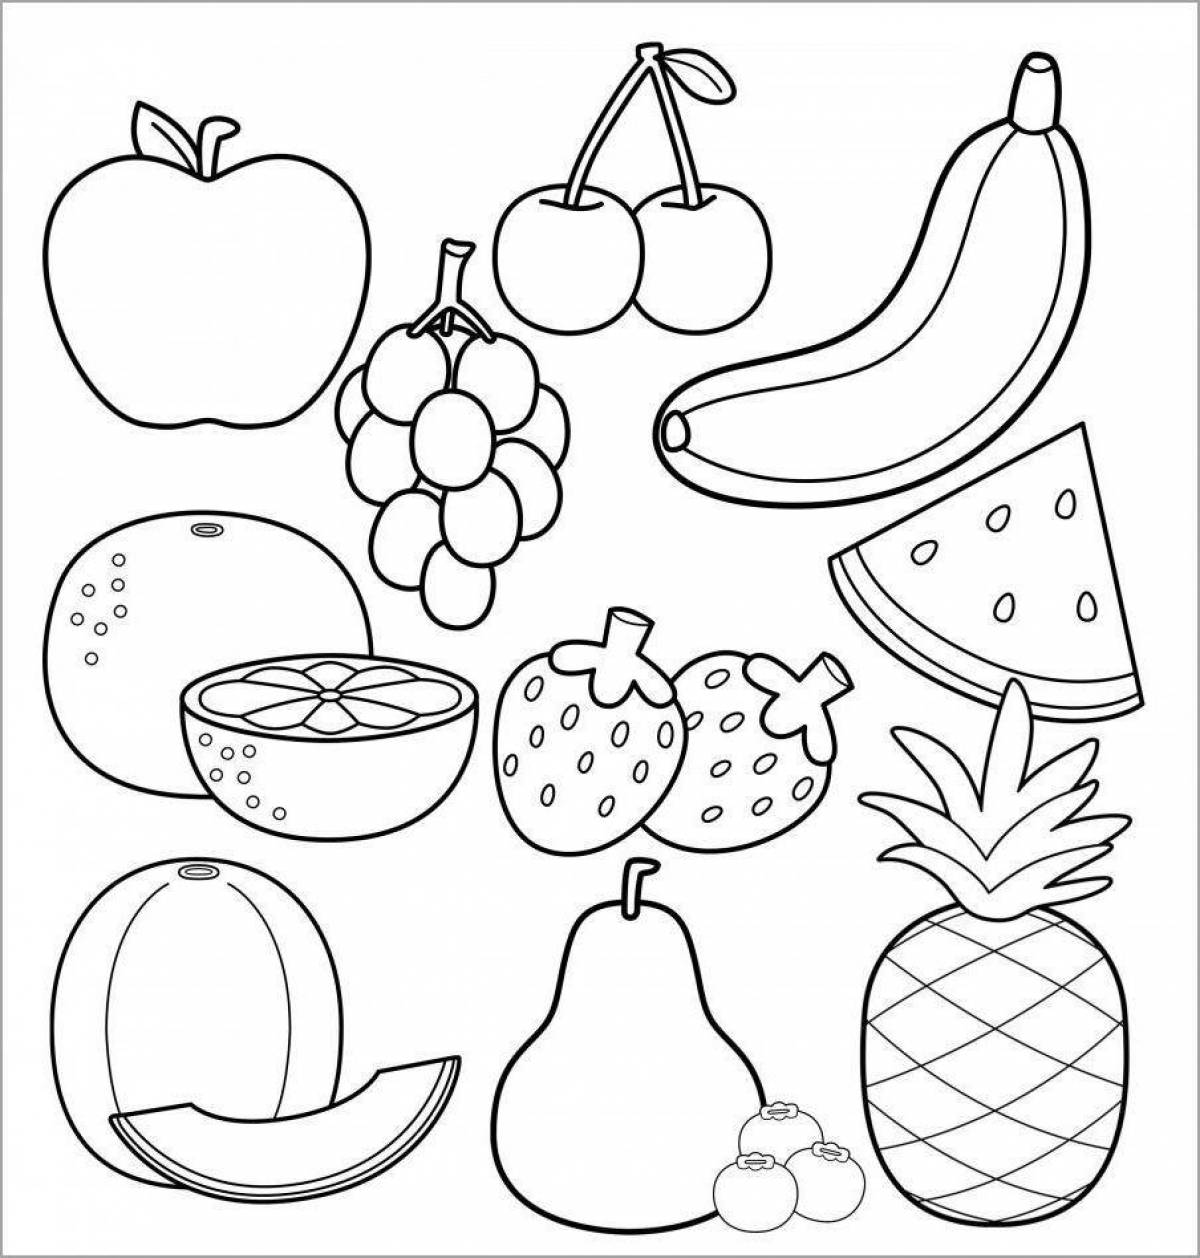 Correct coloring grand coloring page